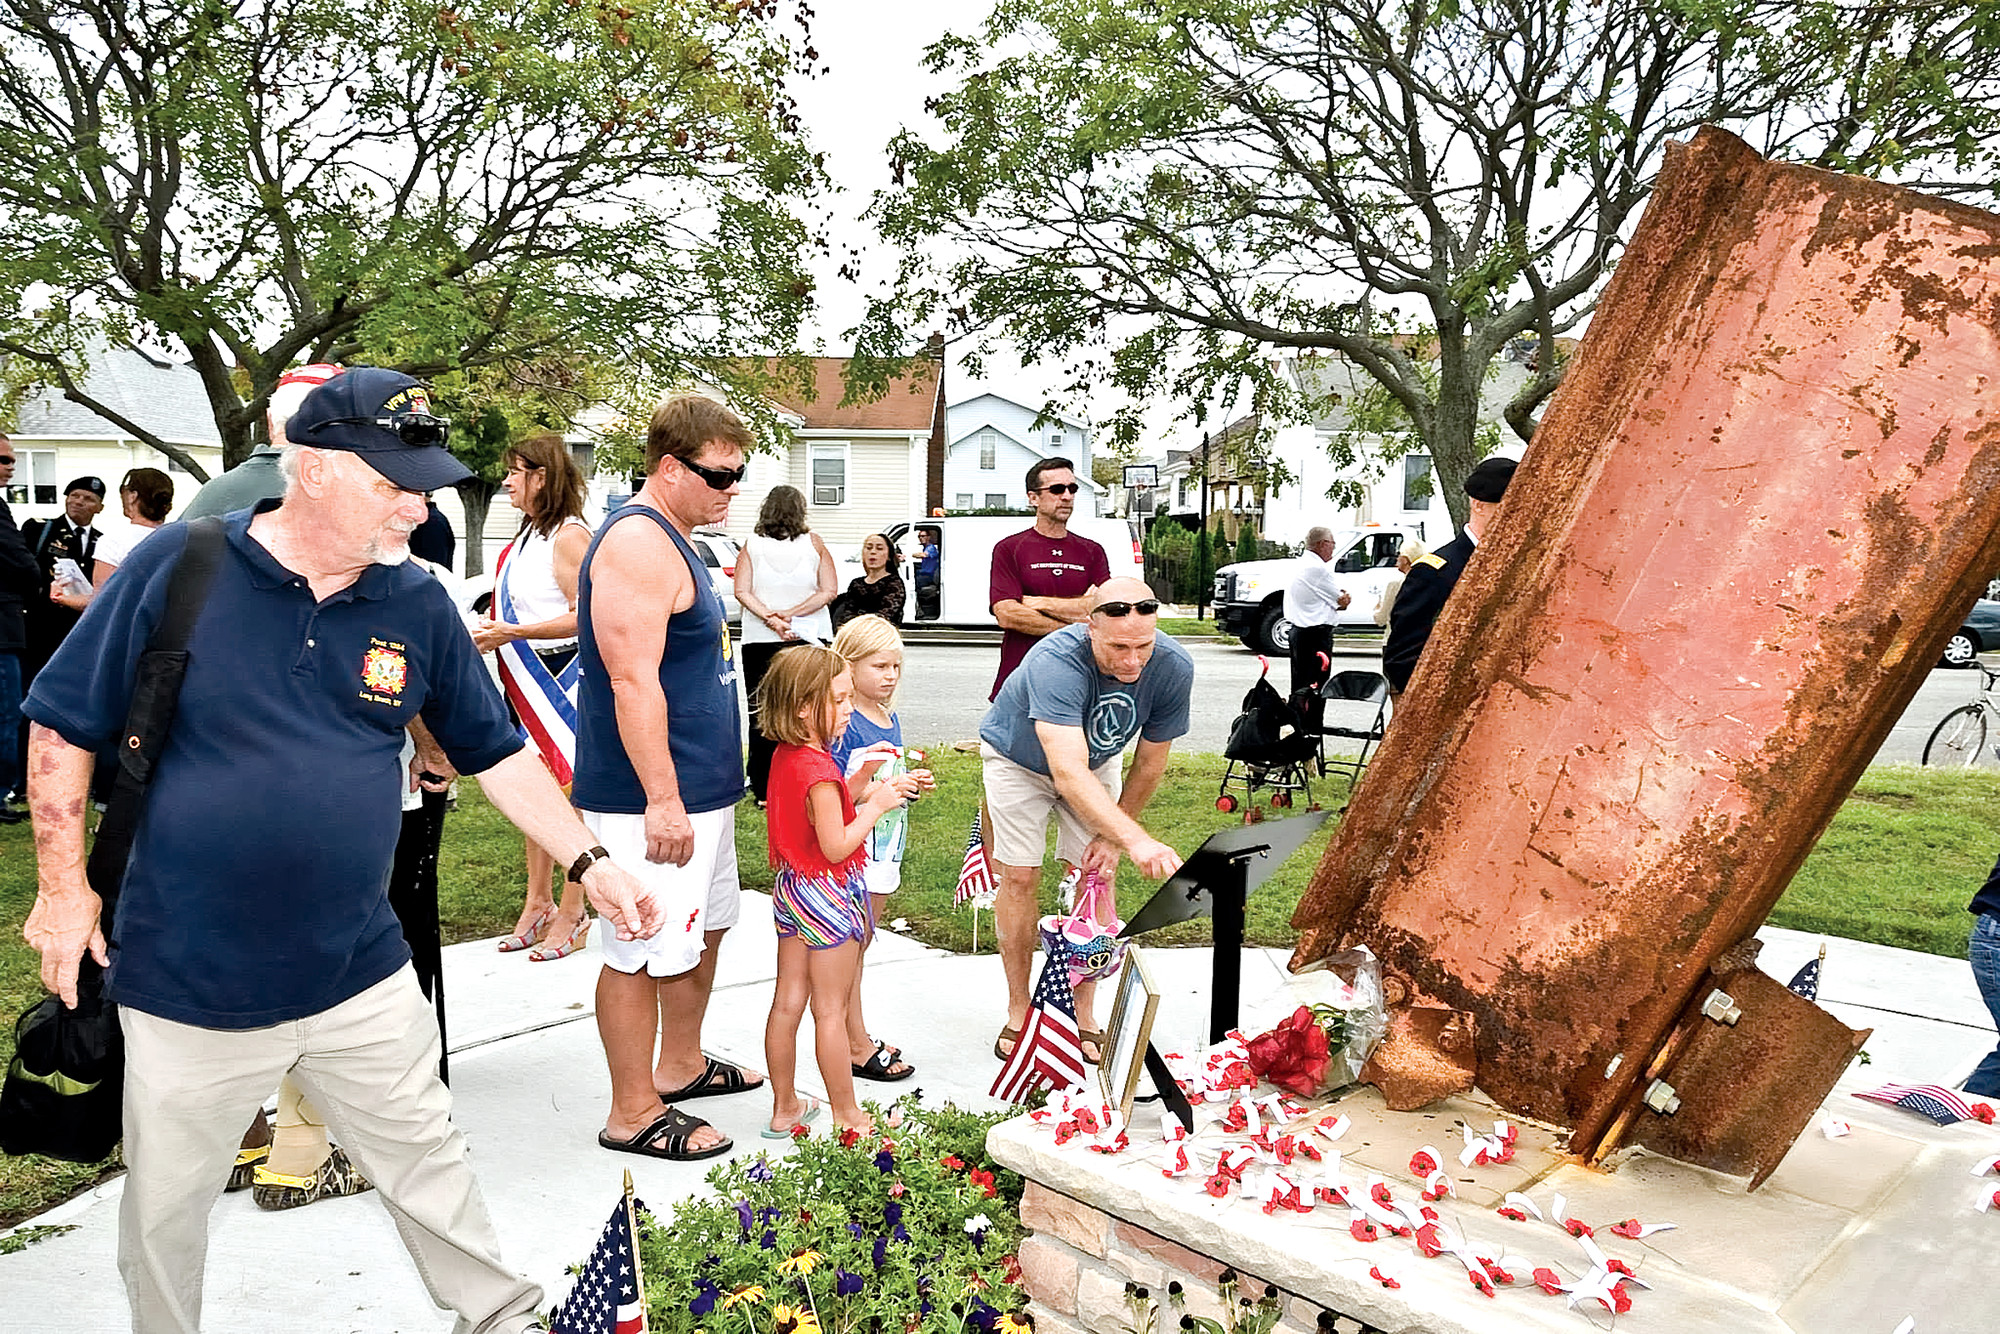 Courtesy City of Long Beach
About 200 people attended the ceremony last Sunday, hosted by the city and VFW Post 1384.